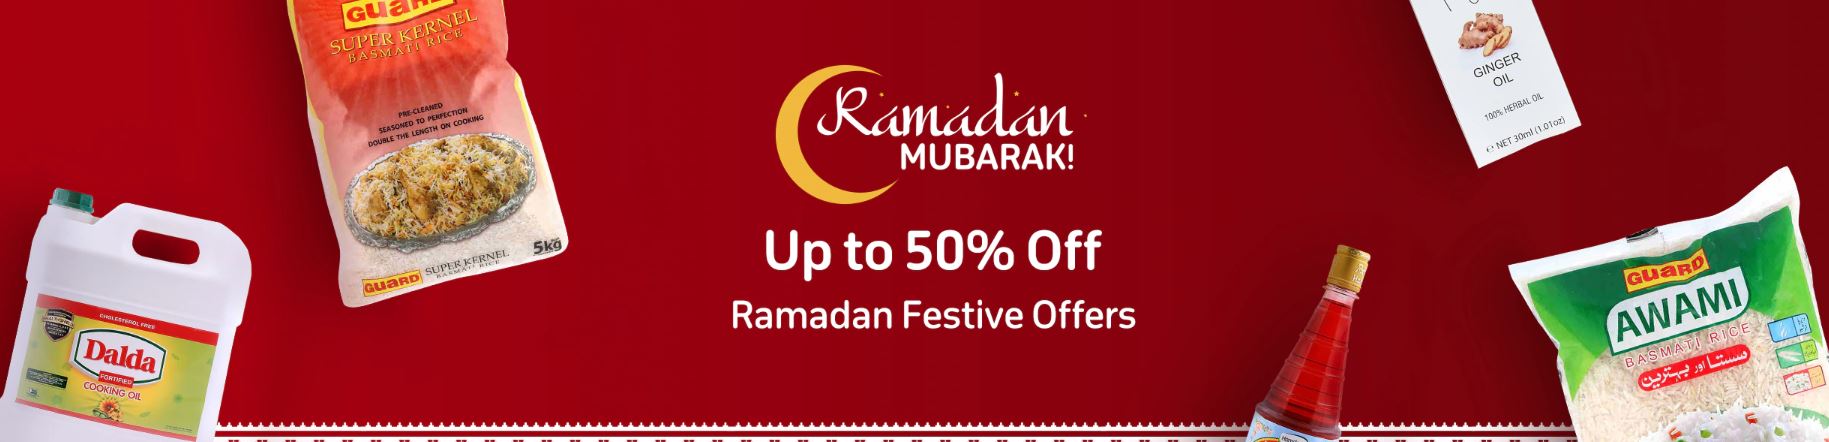 Carrefour Ramadan Packages